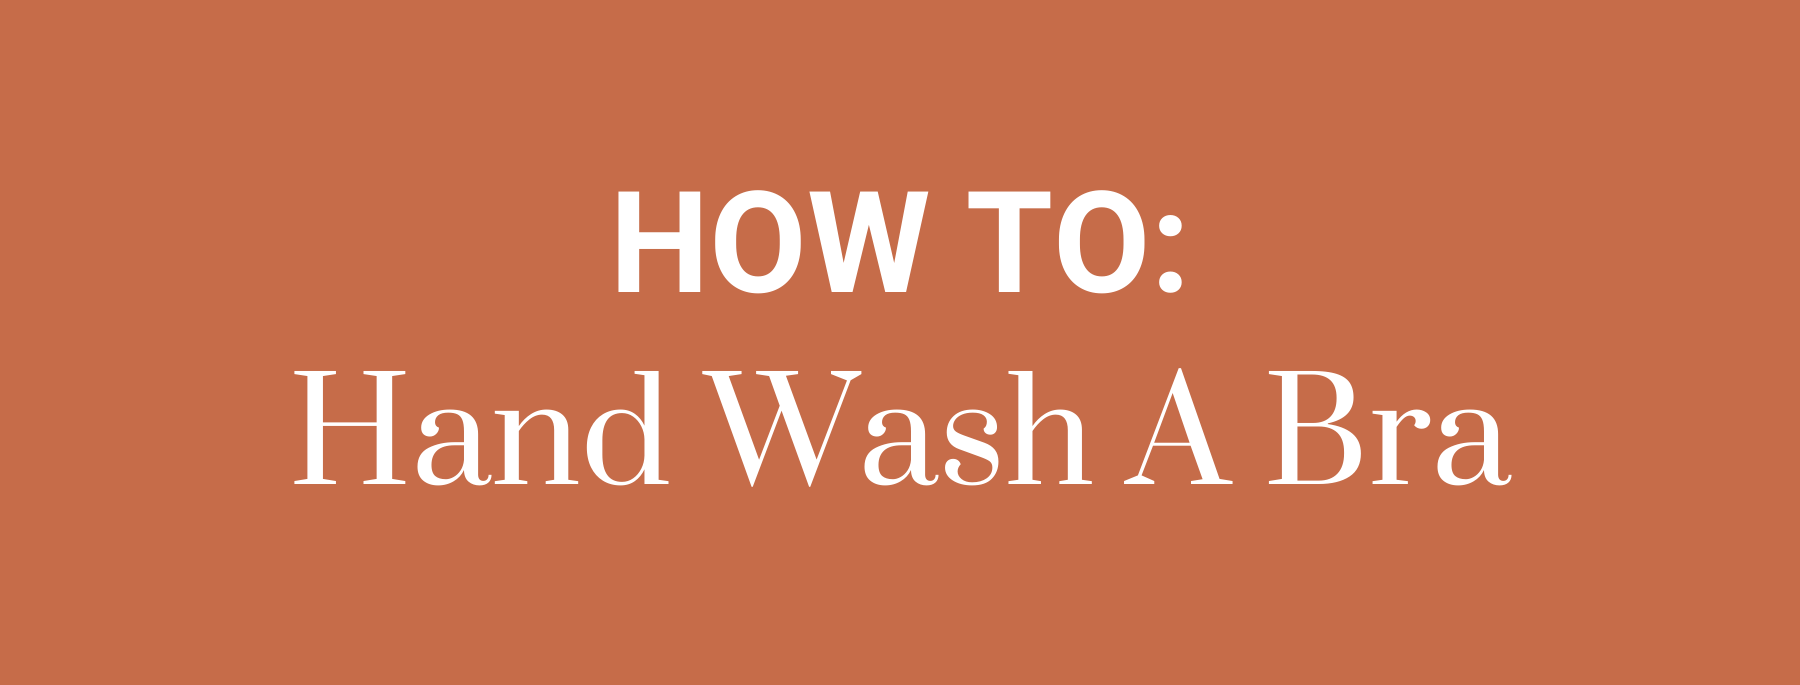 How to: hand wash a bra.